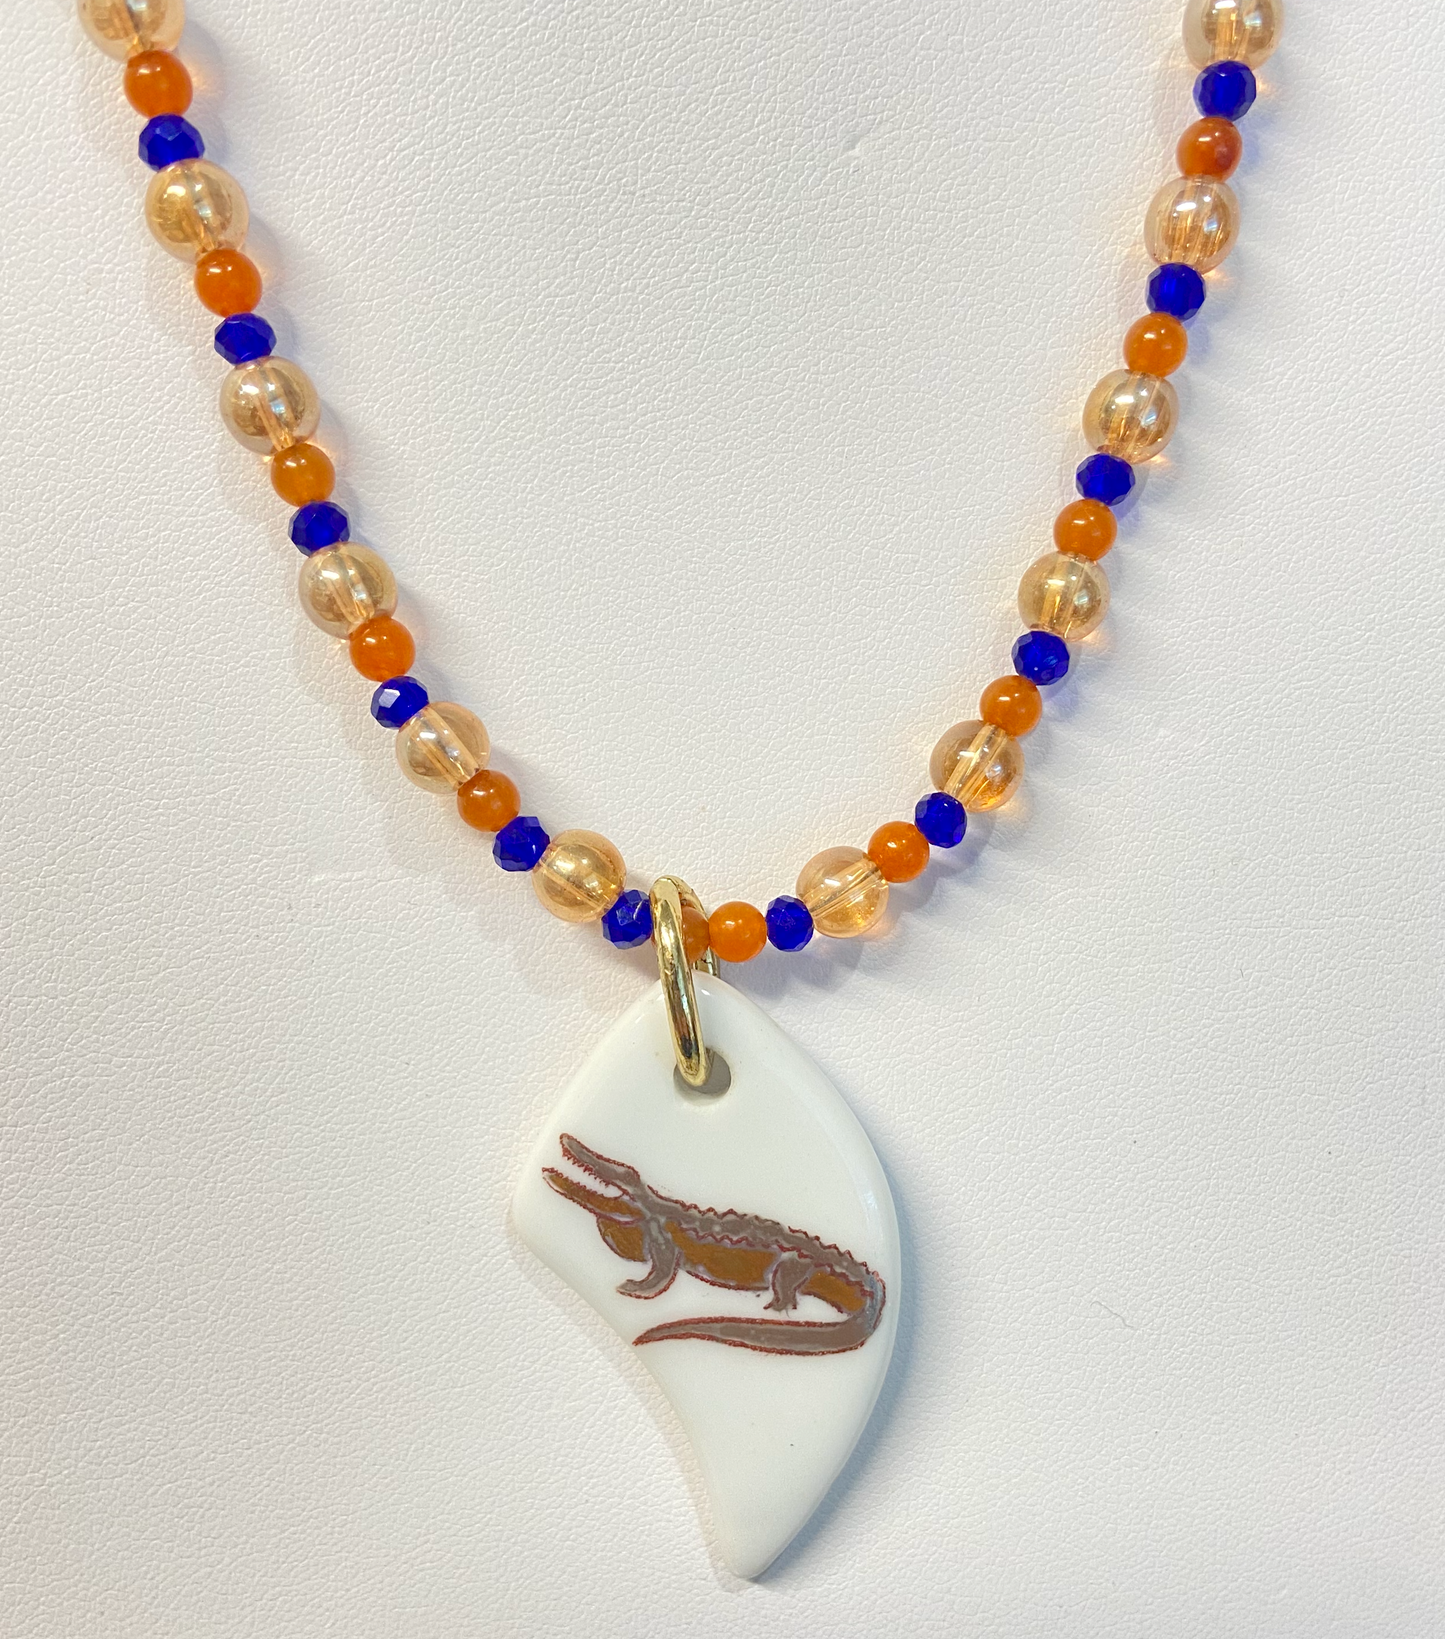 Gator Necklace hand painted gator in gold and platinum on a porcelain pendant